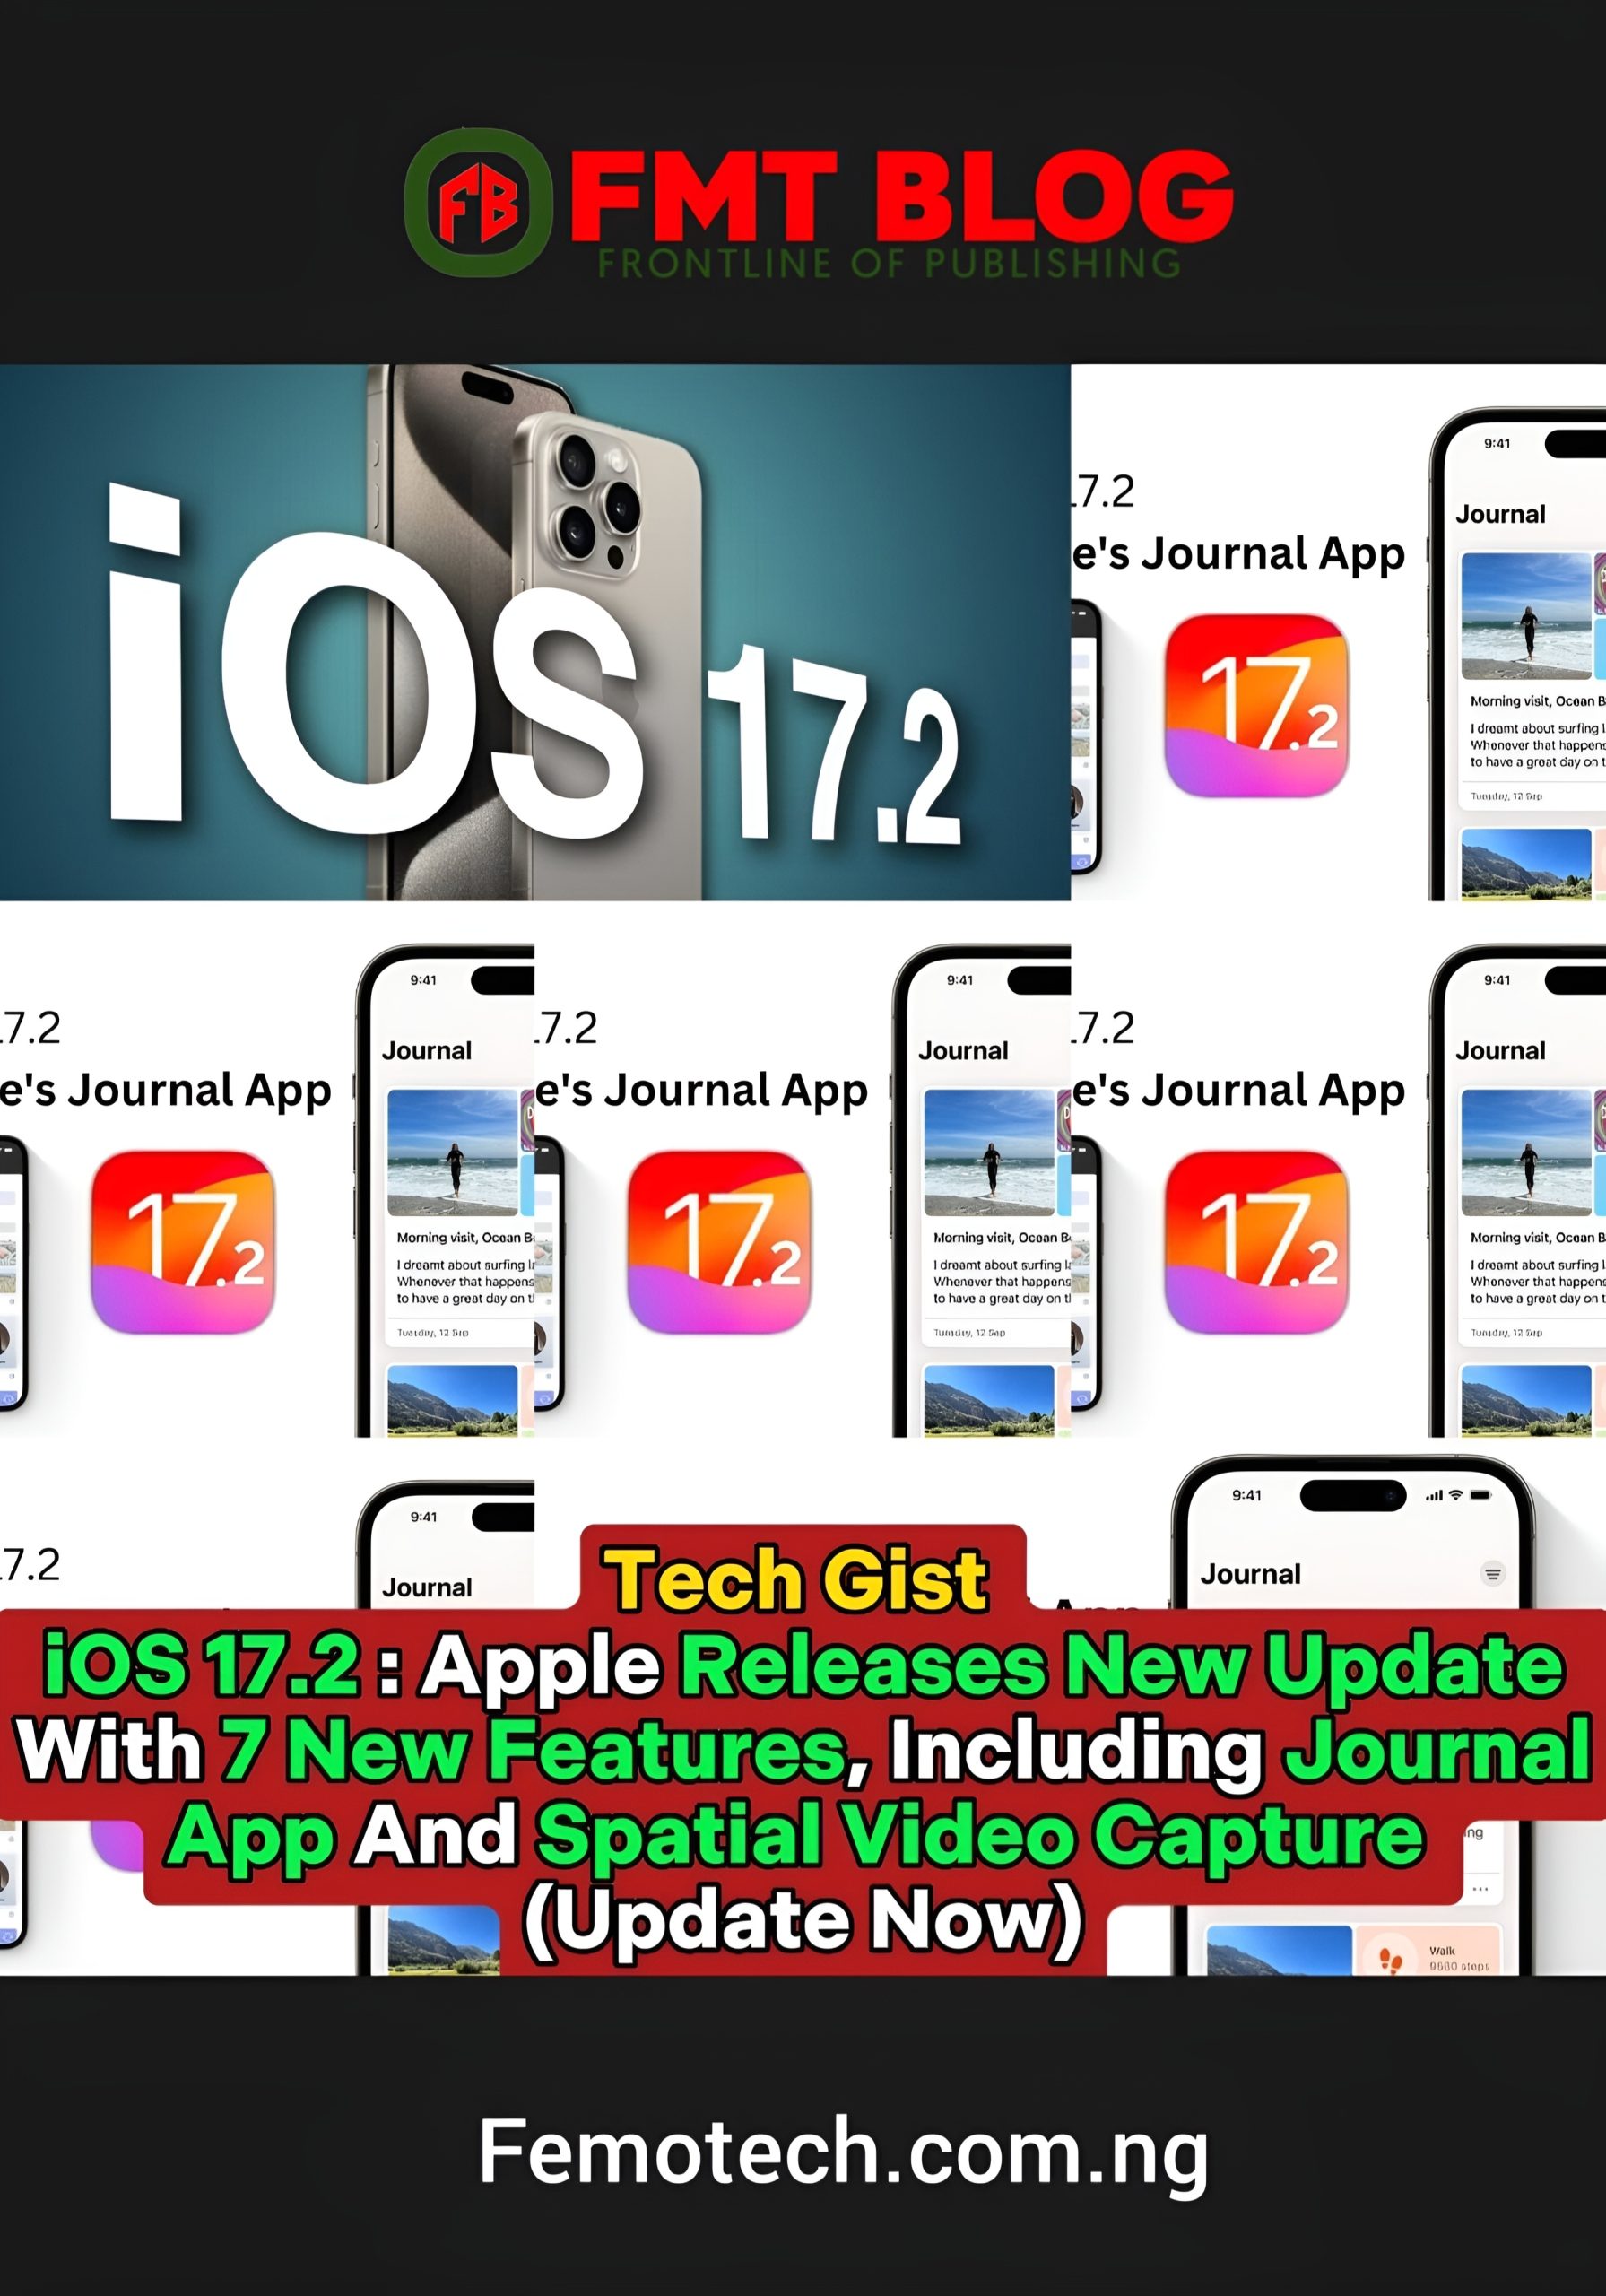 iOS 17.2: Apple Releases New Update With 7 New Features Including Journal App And Spatial Video Capture (Update Now)